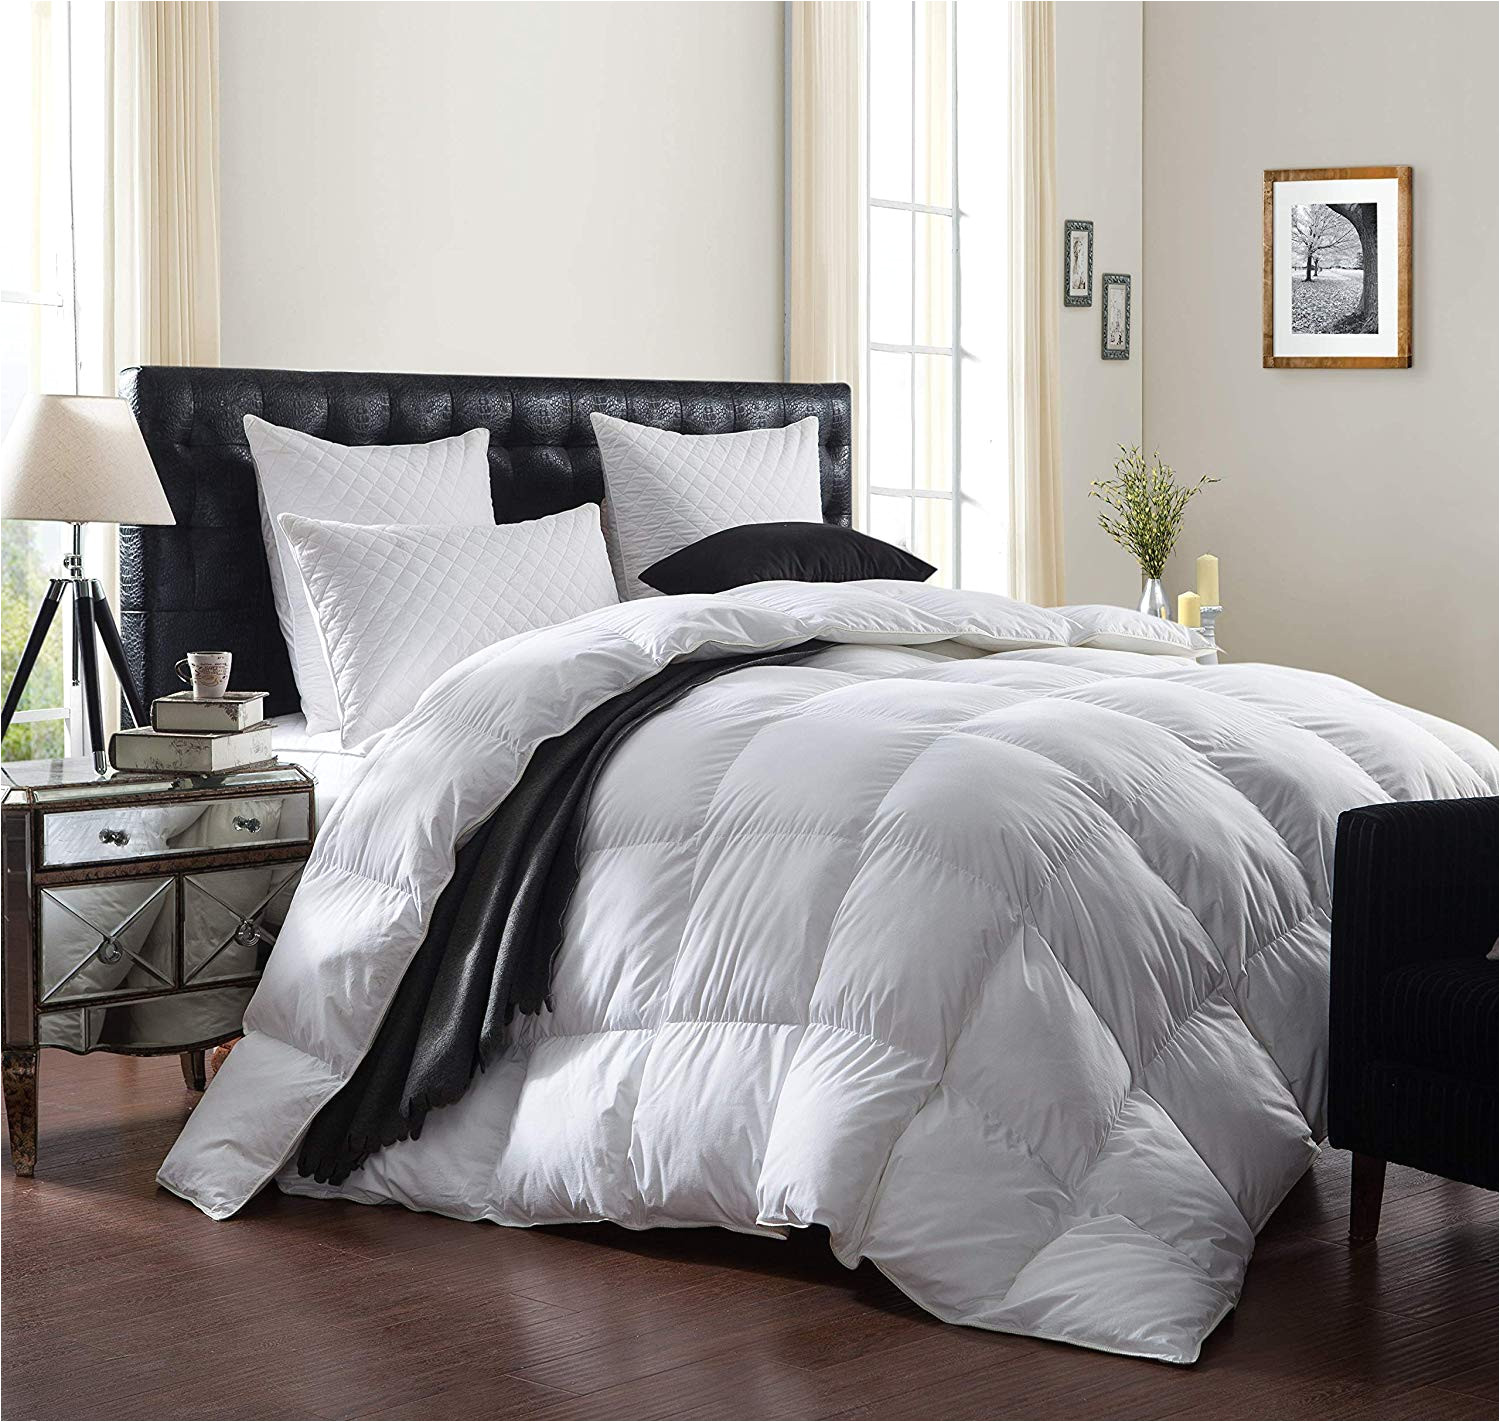 amazon com luxurious 1200 thread count goose down comforter duvet insert king size 1200tc 100 egyptian cotton cover 750 fill power